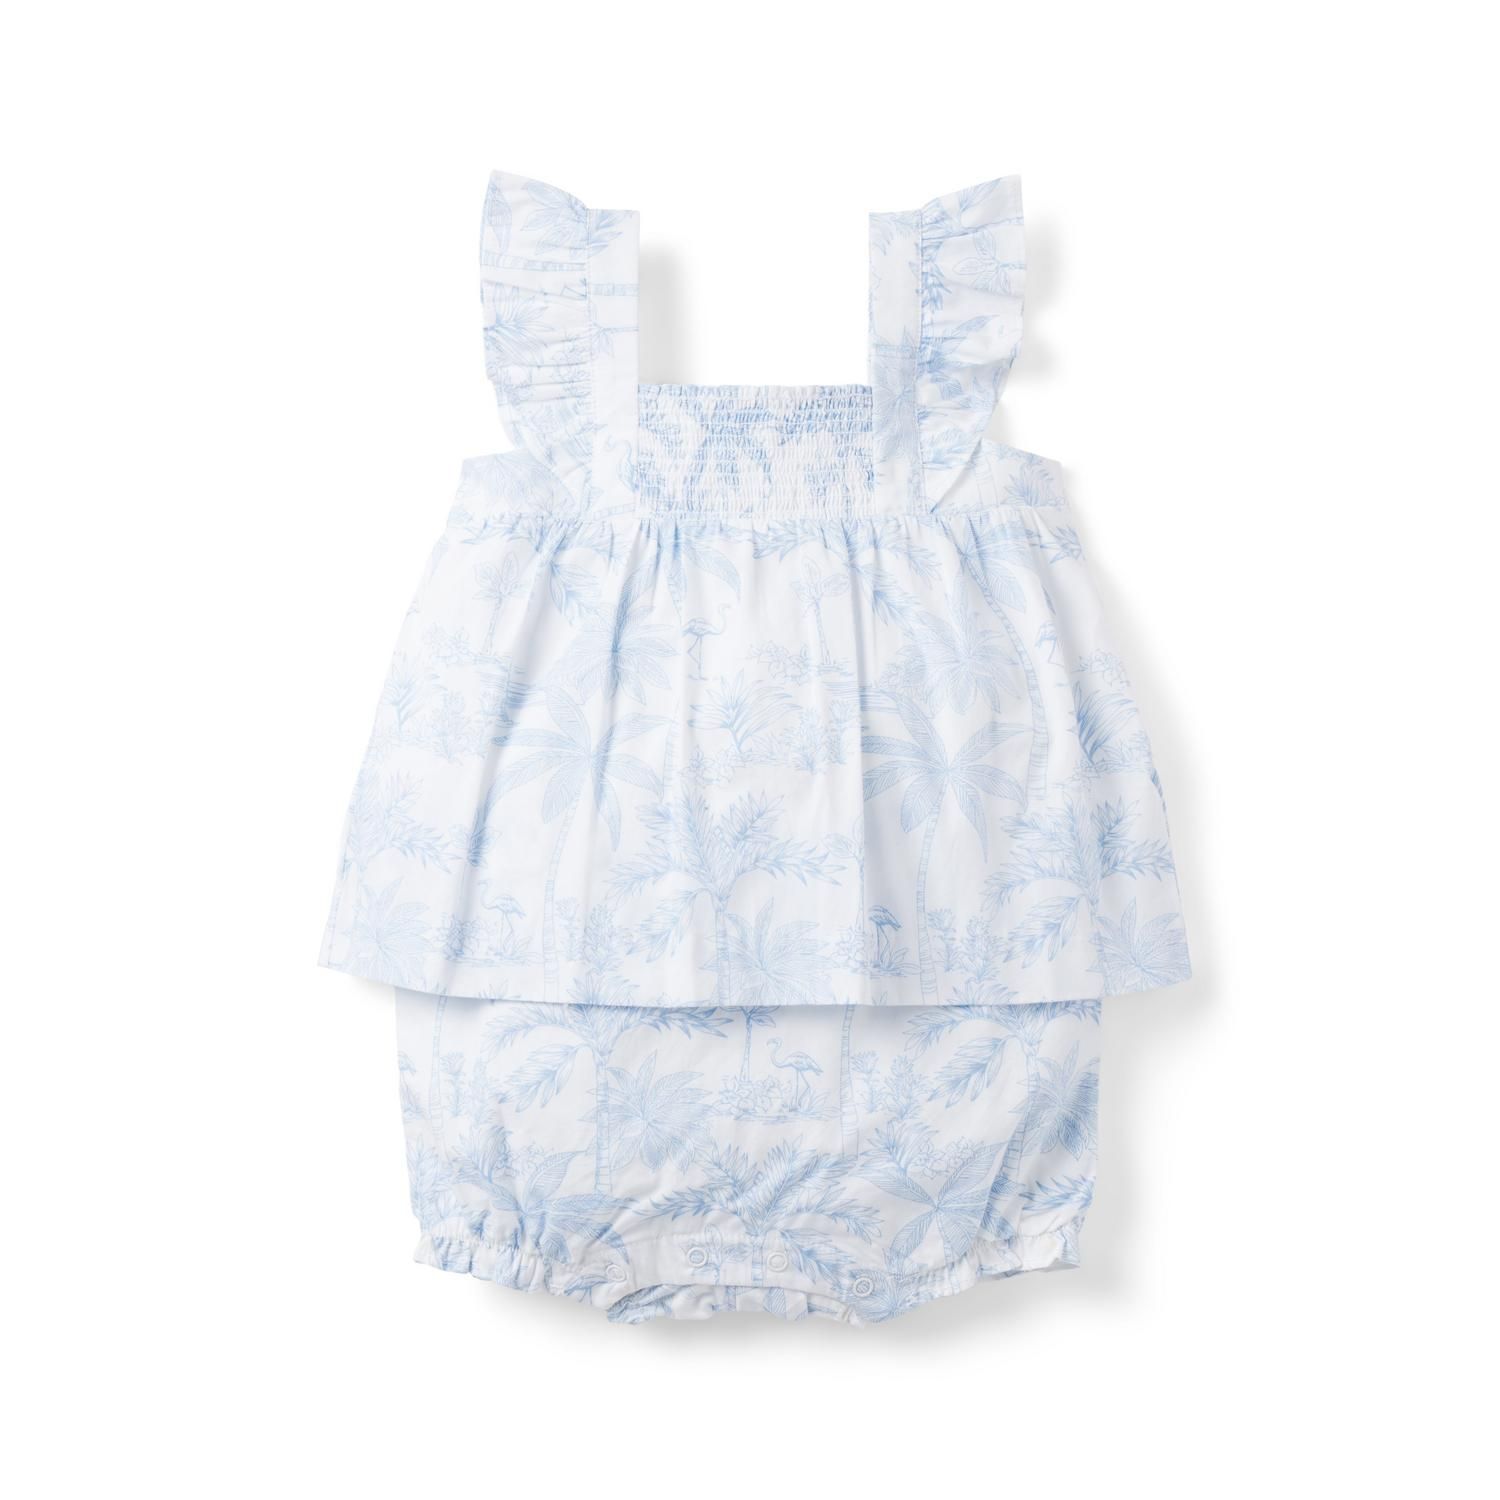 The Flamingo Toile Smocked Baby Romper | Janie and Jack